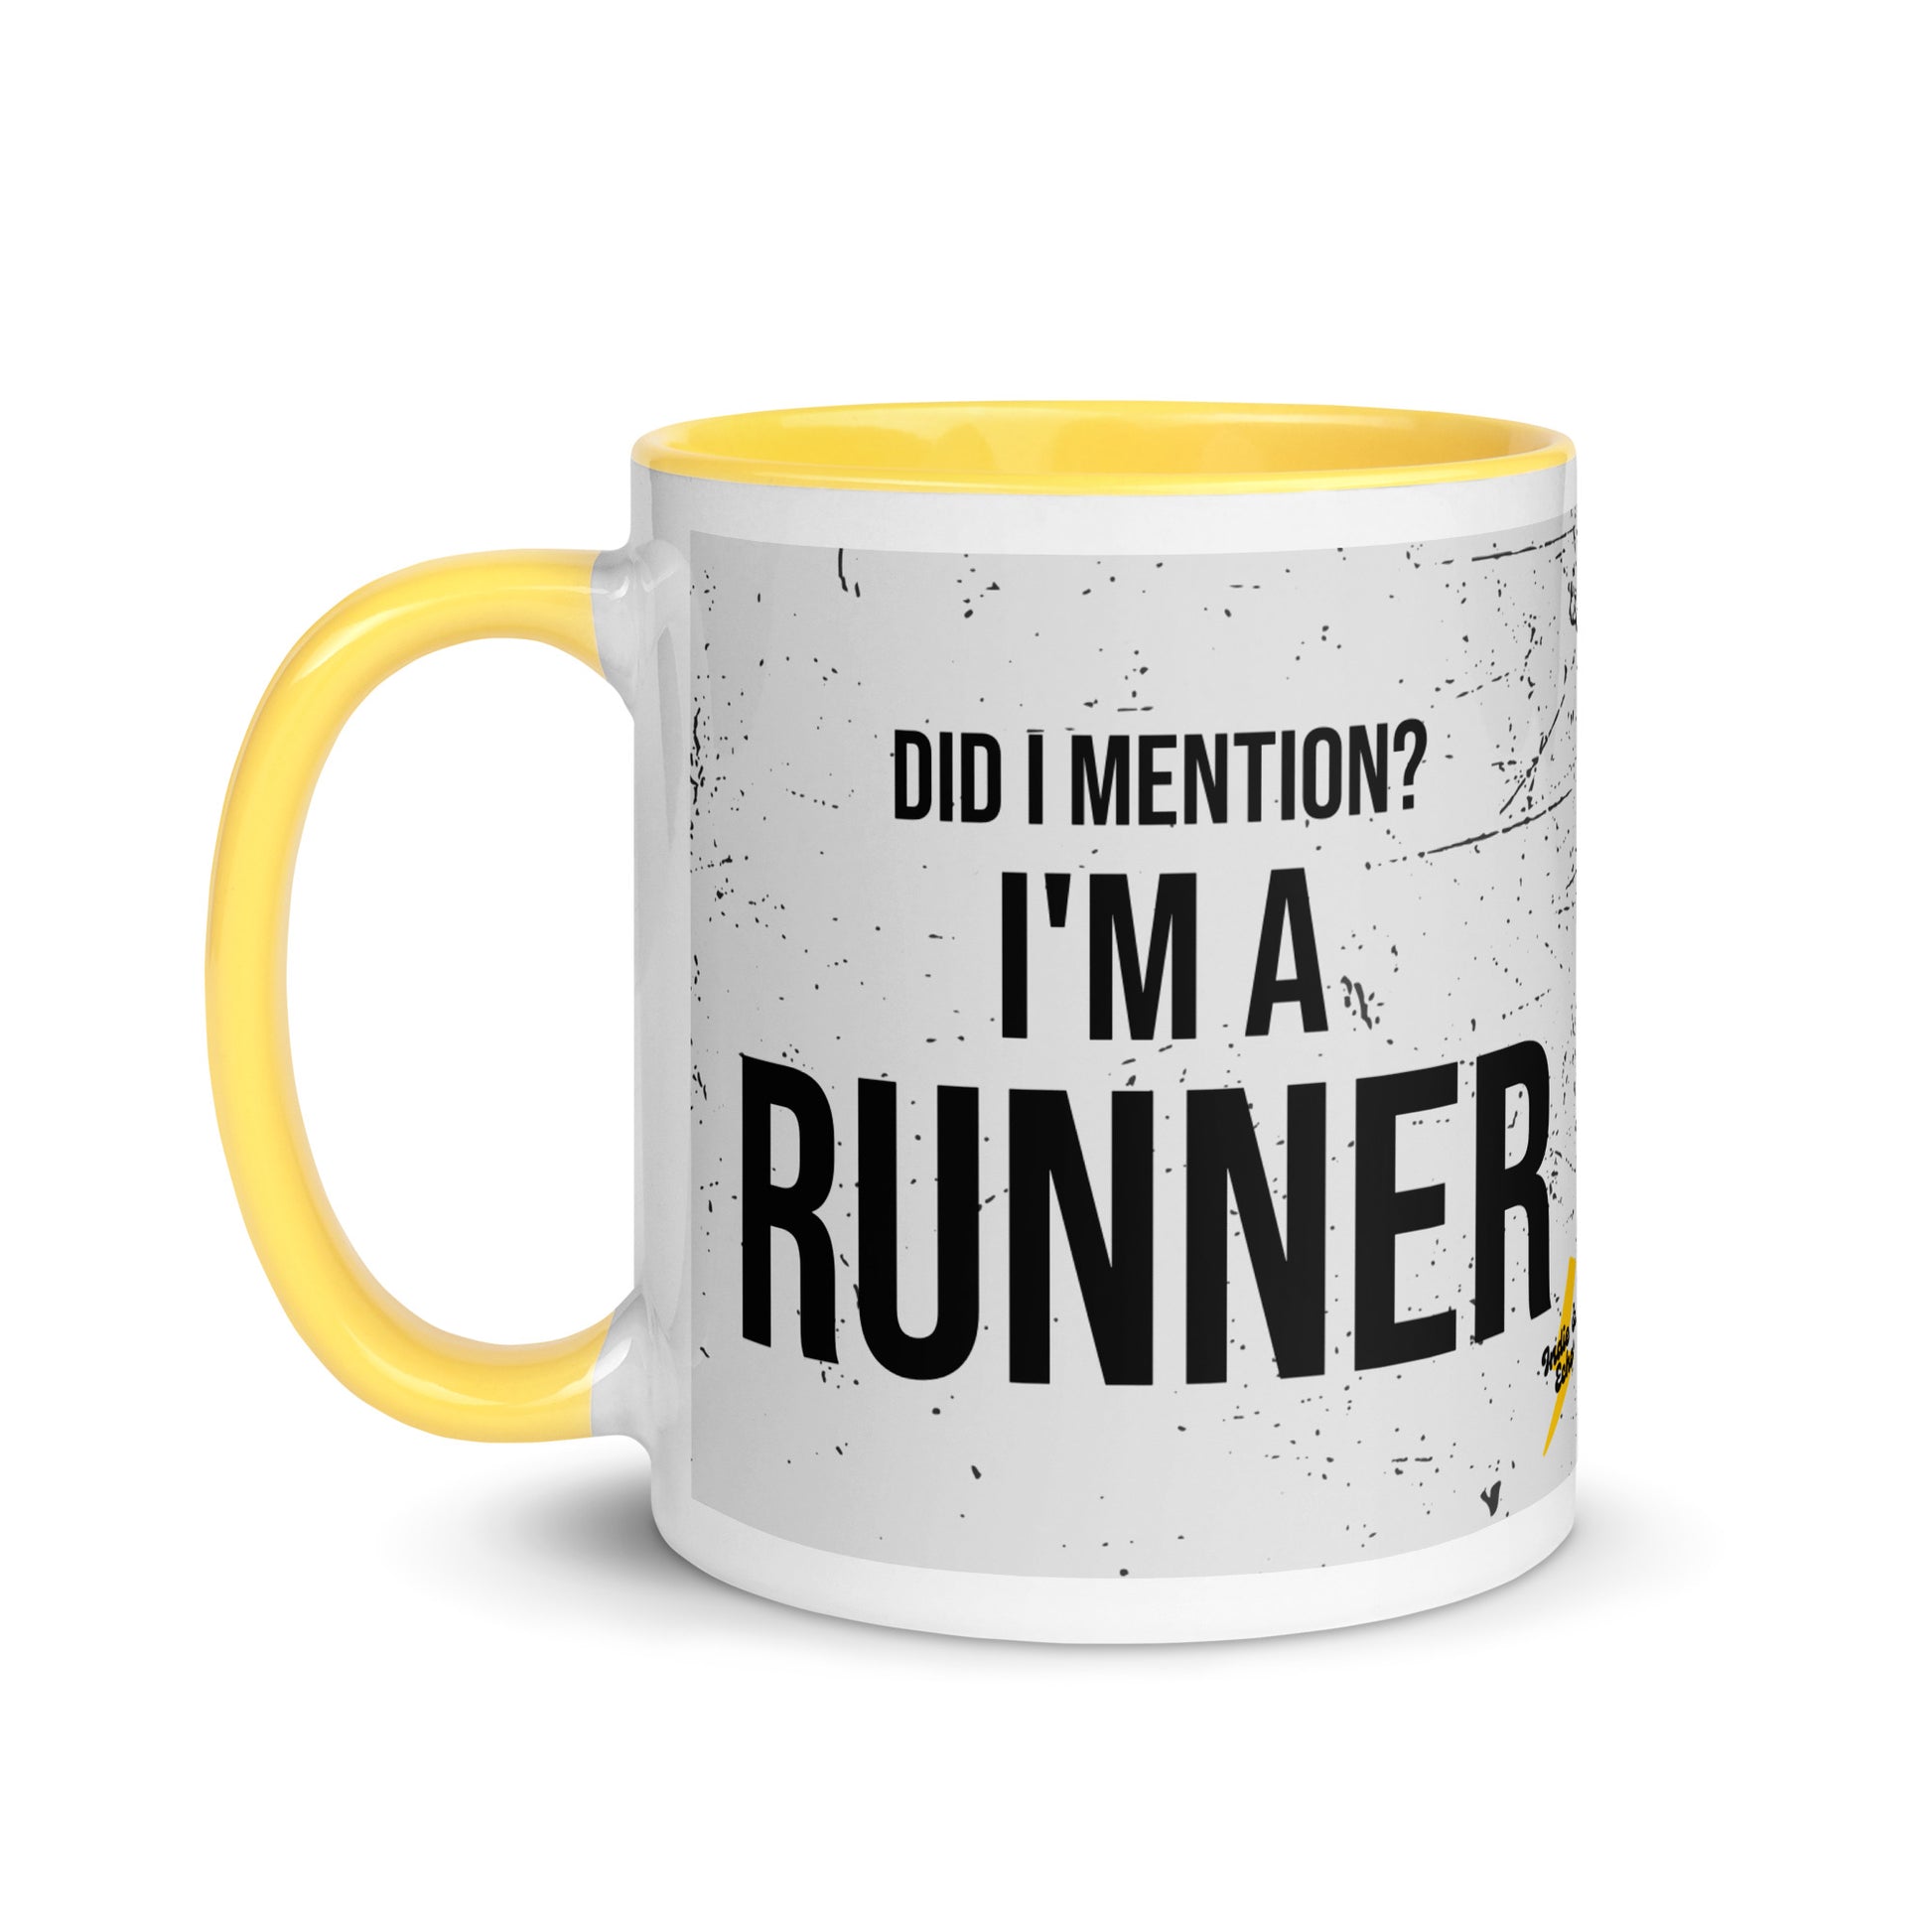 Mug with yellow handle and a grey splatter print design with the phrase did I mention? I'm a runner across the front. A nice gift for a running friend. 